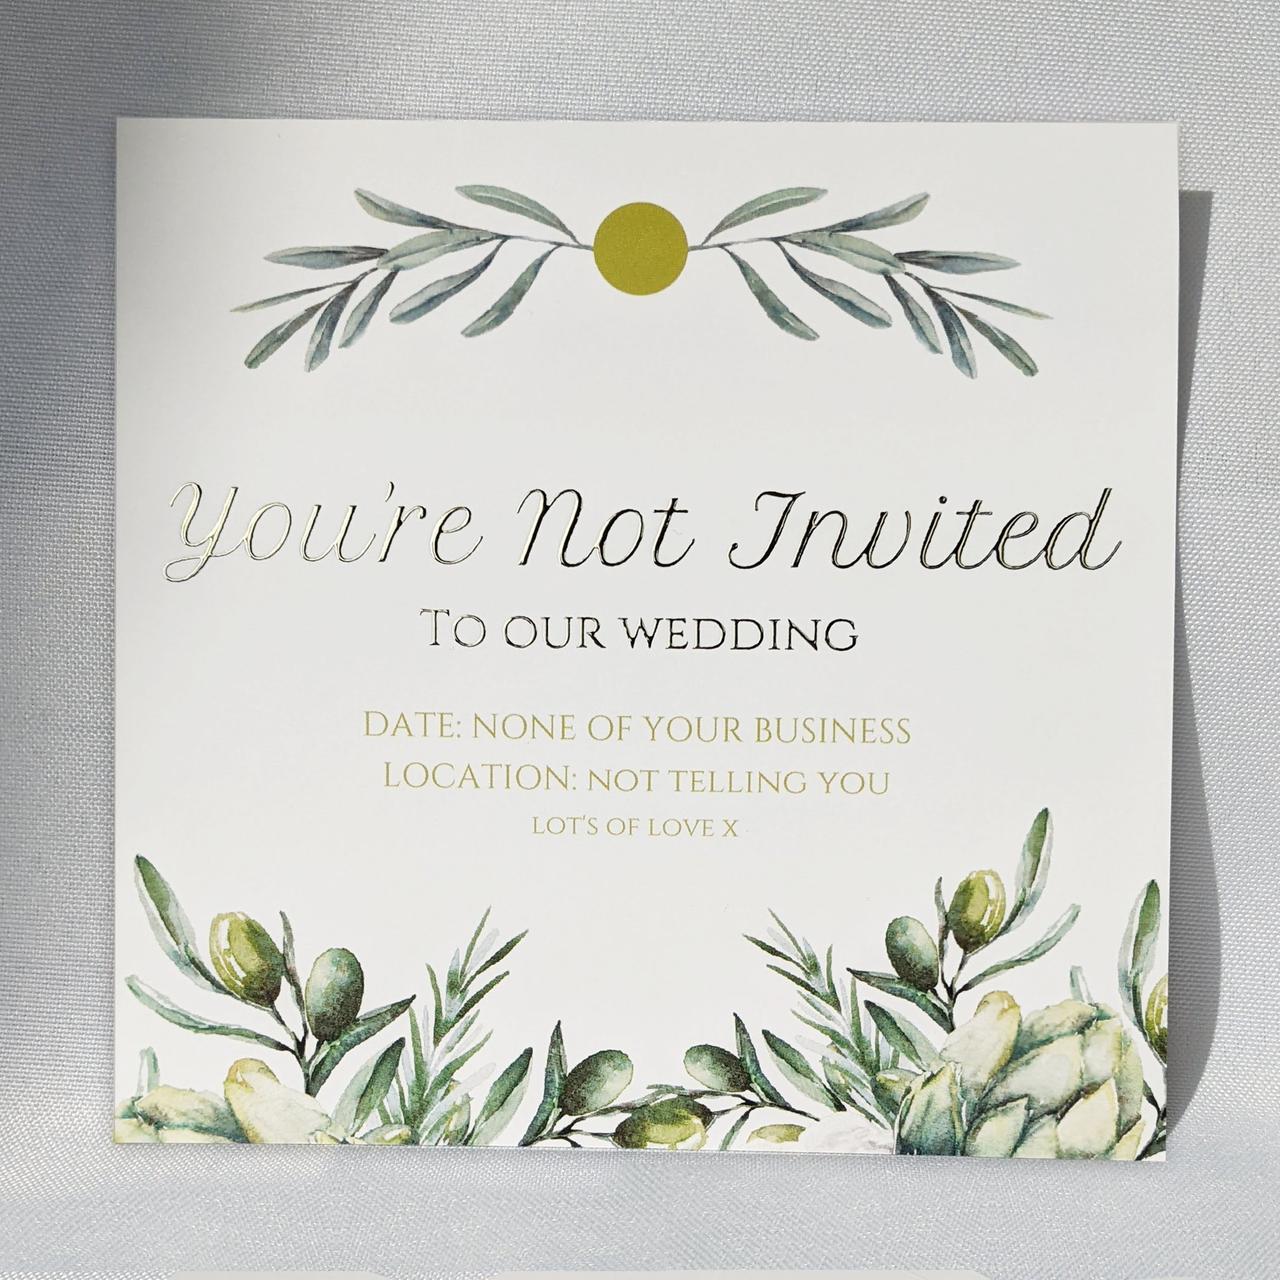 13 Polite Ways to Tell Someone They're Not Invited to Your Wedding